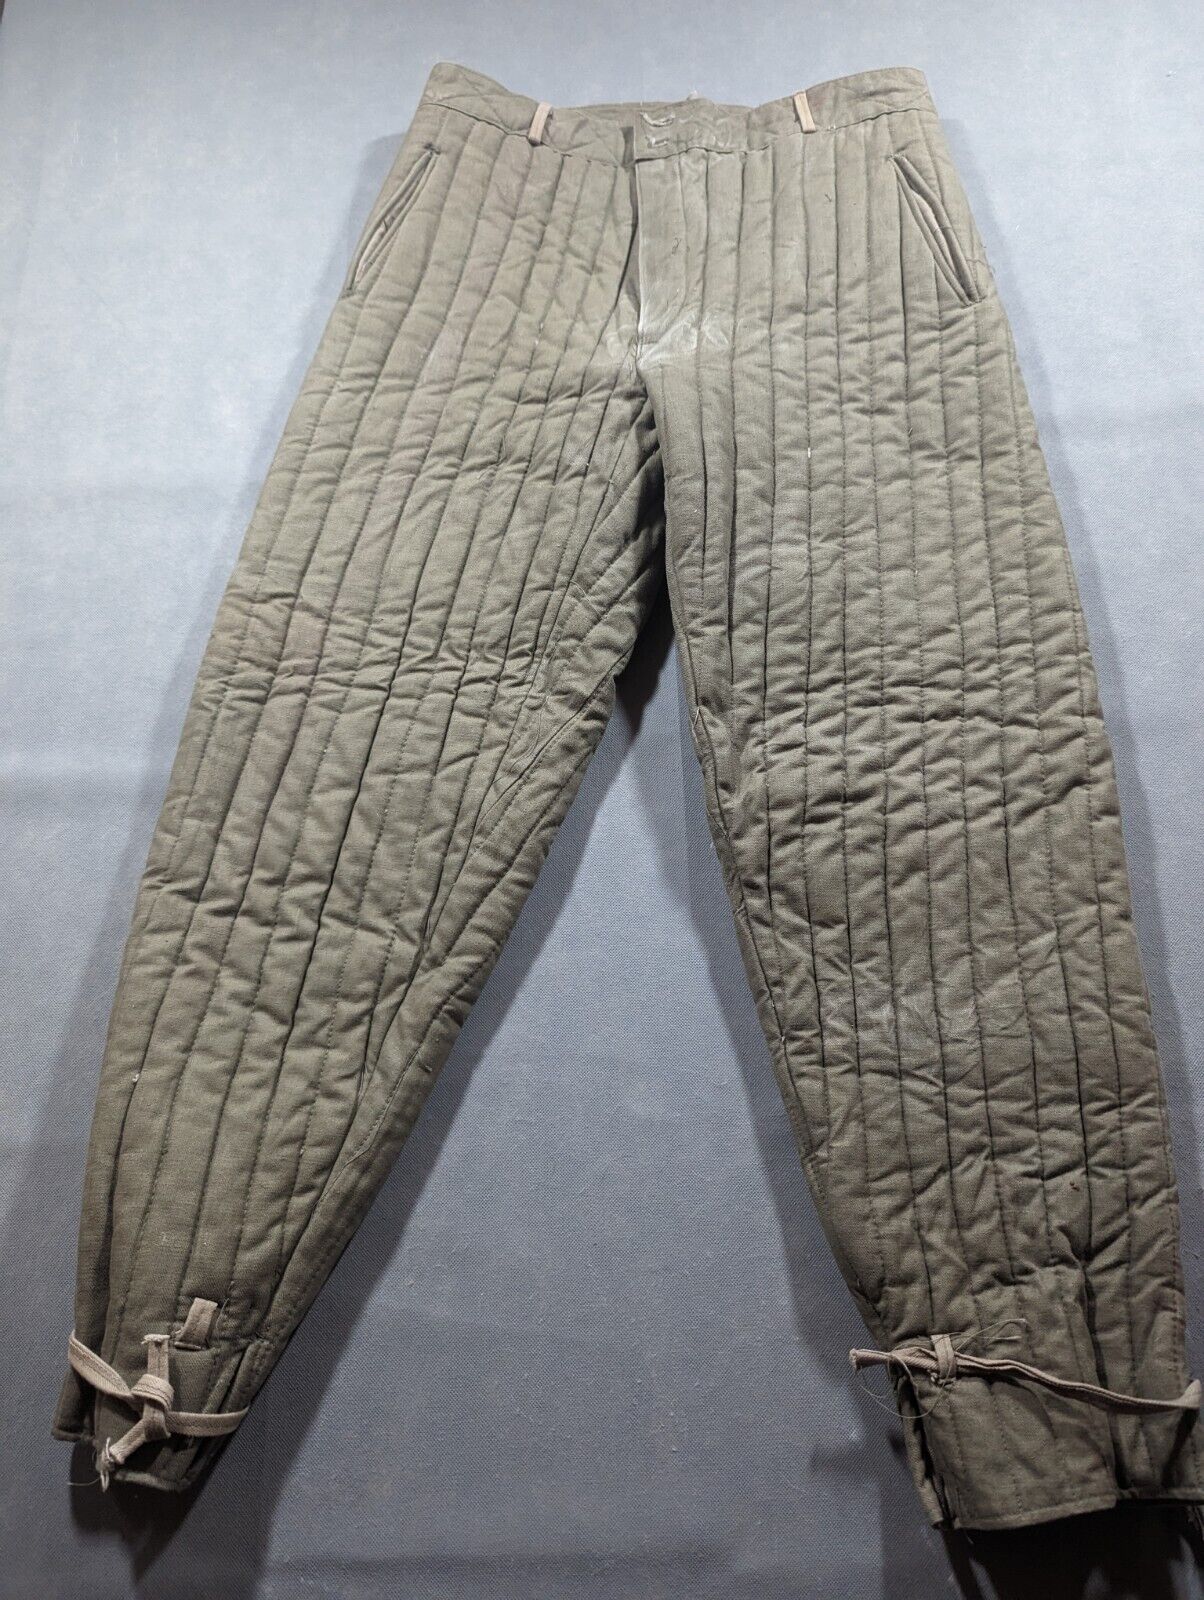 Telogreika Pants Men's 35x31 Green Insulated Cold Weather Military 1951 Vtg